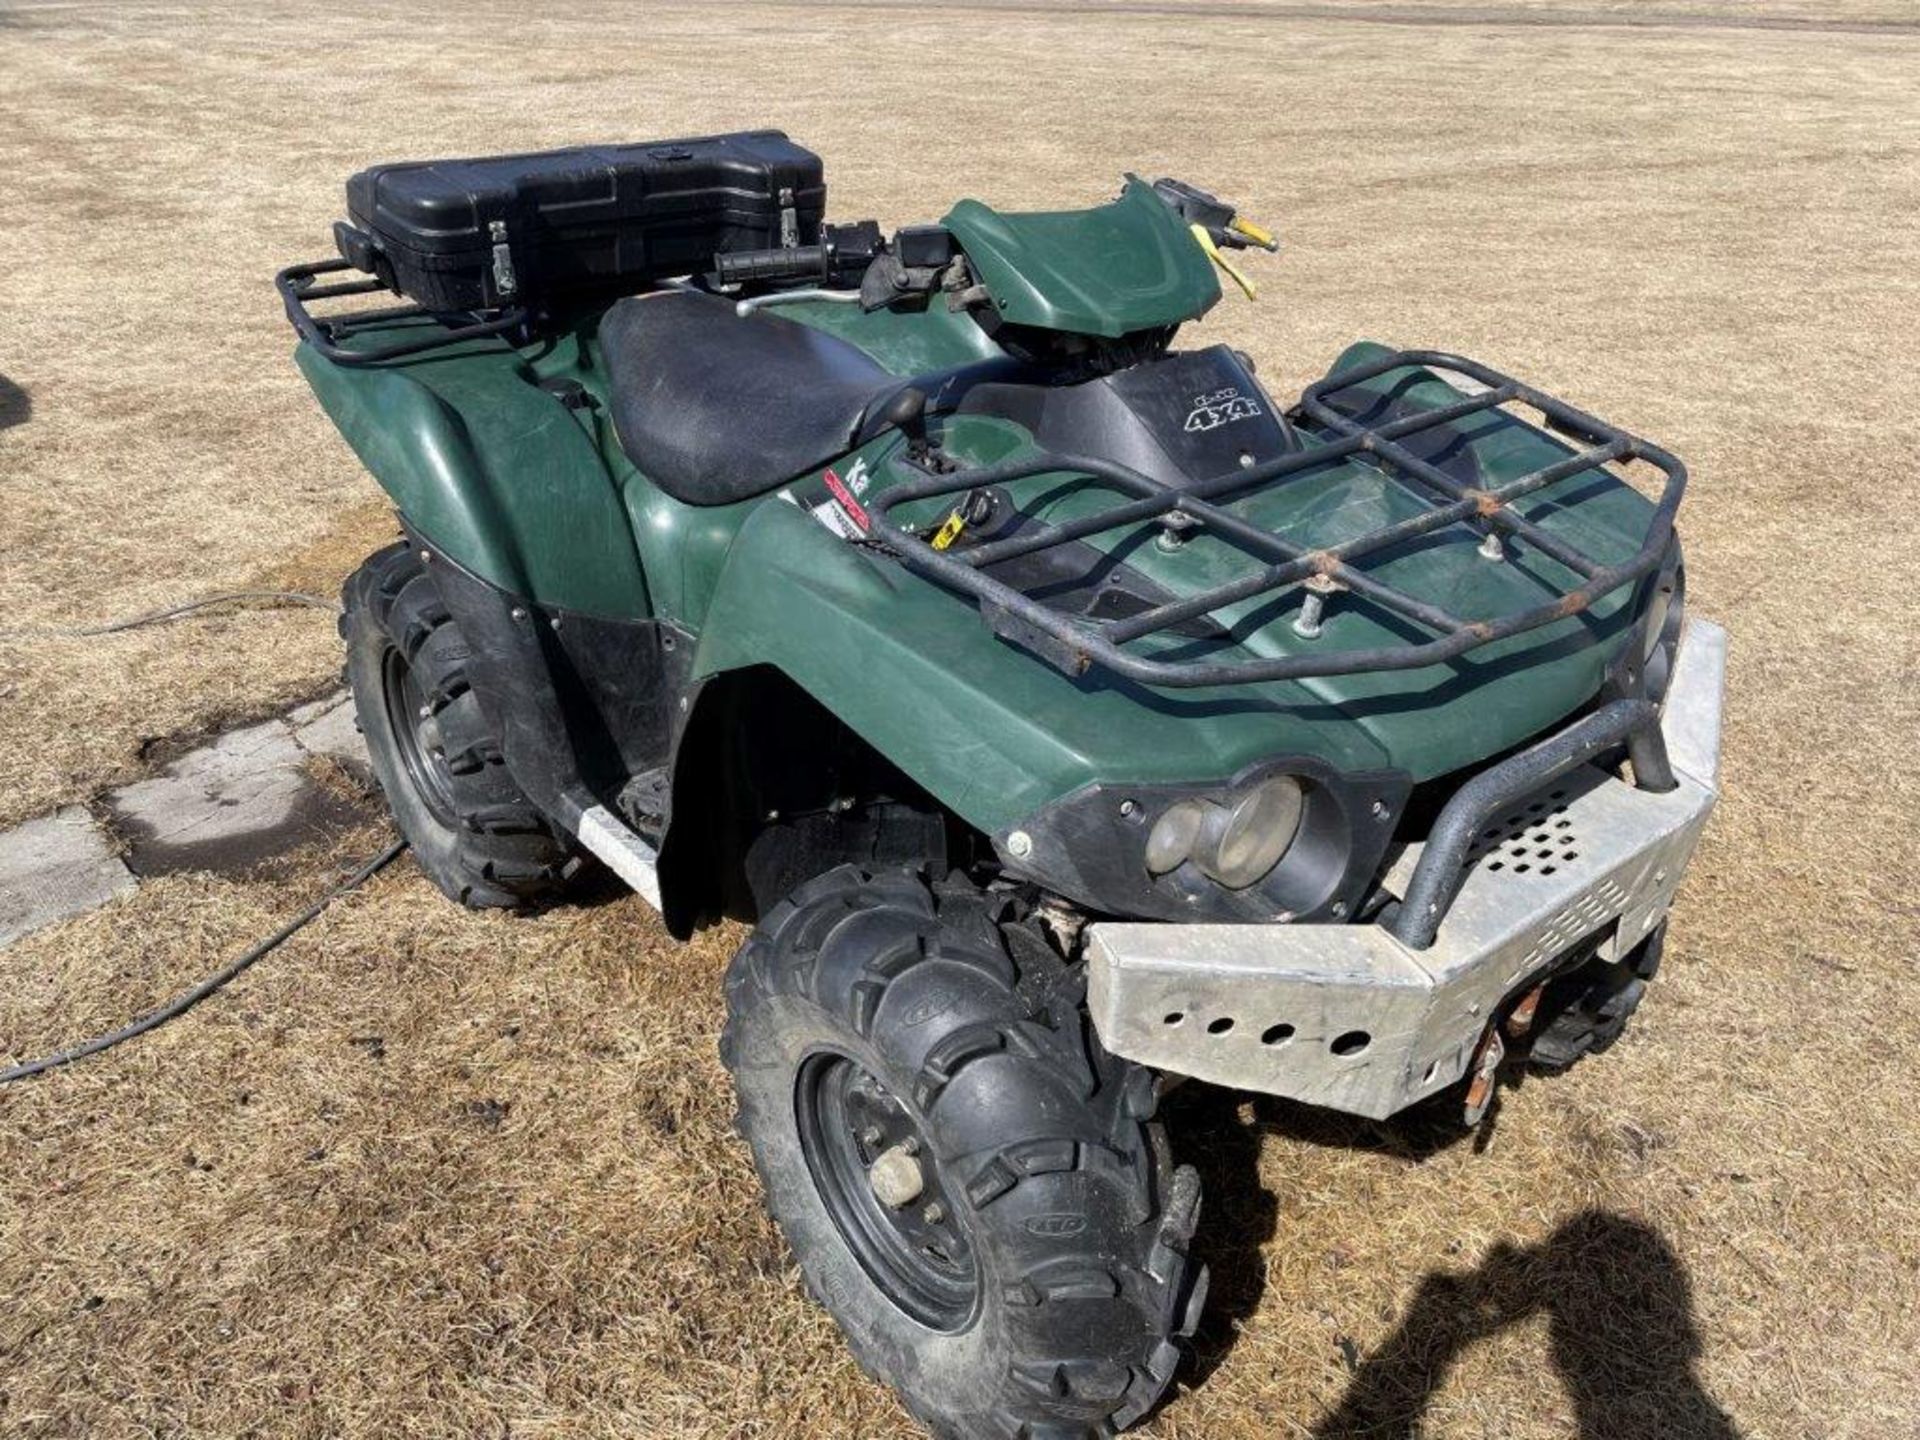 2007 KAWASAKI BRUTE FORCE 750 ATV 4X4 AUTO, RECENT CARB CLEAN, NEW BATTERY, 1762 KM'S SHOWING